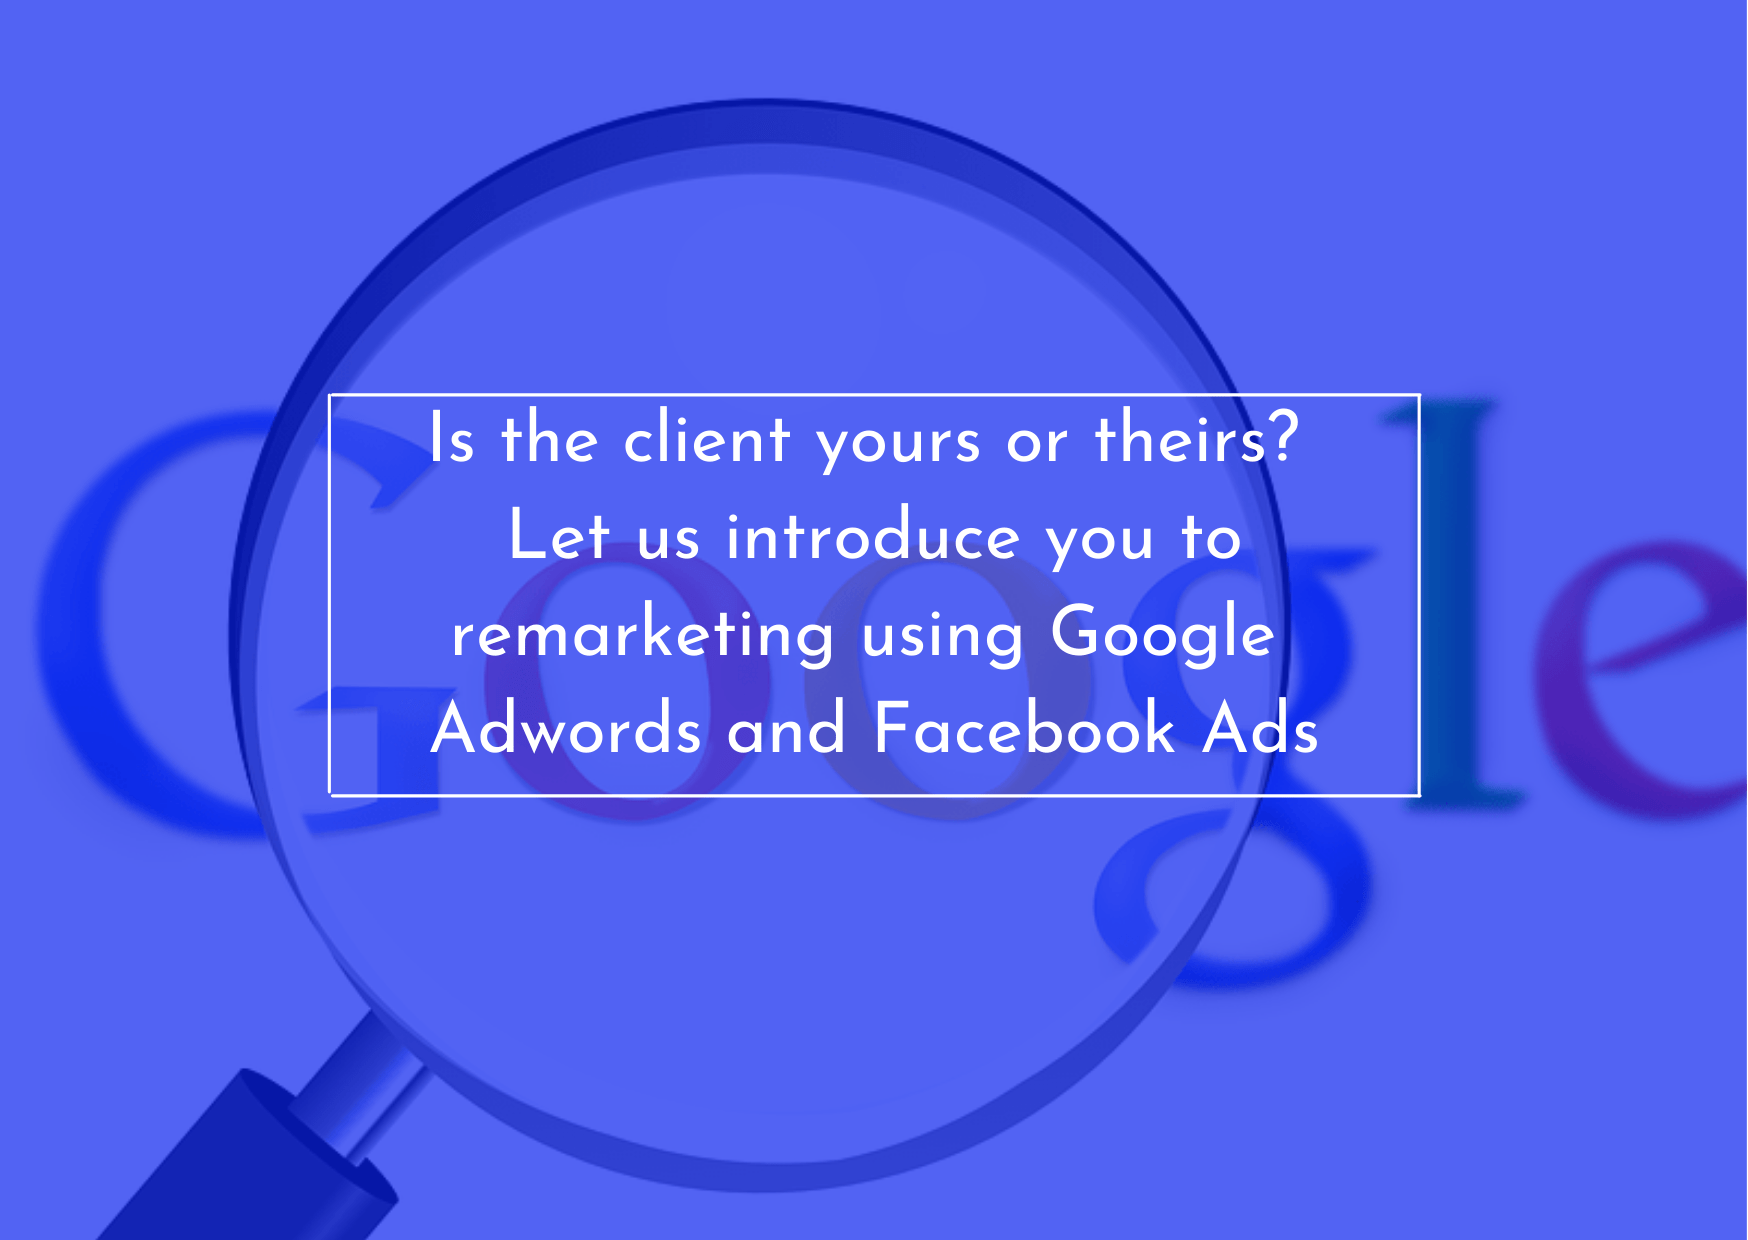 remarketing using Google Adwords and Facebook Ads